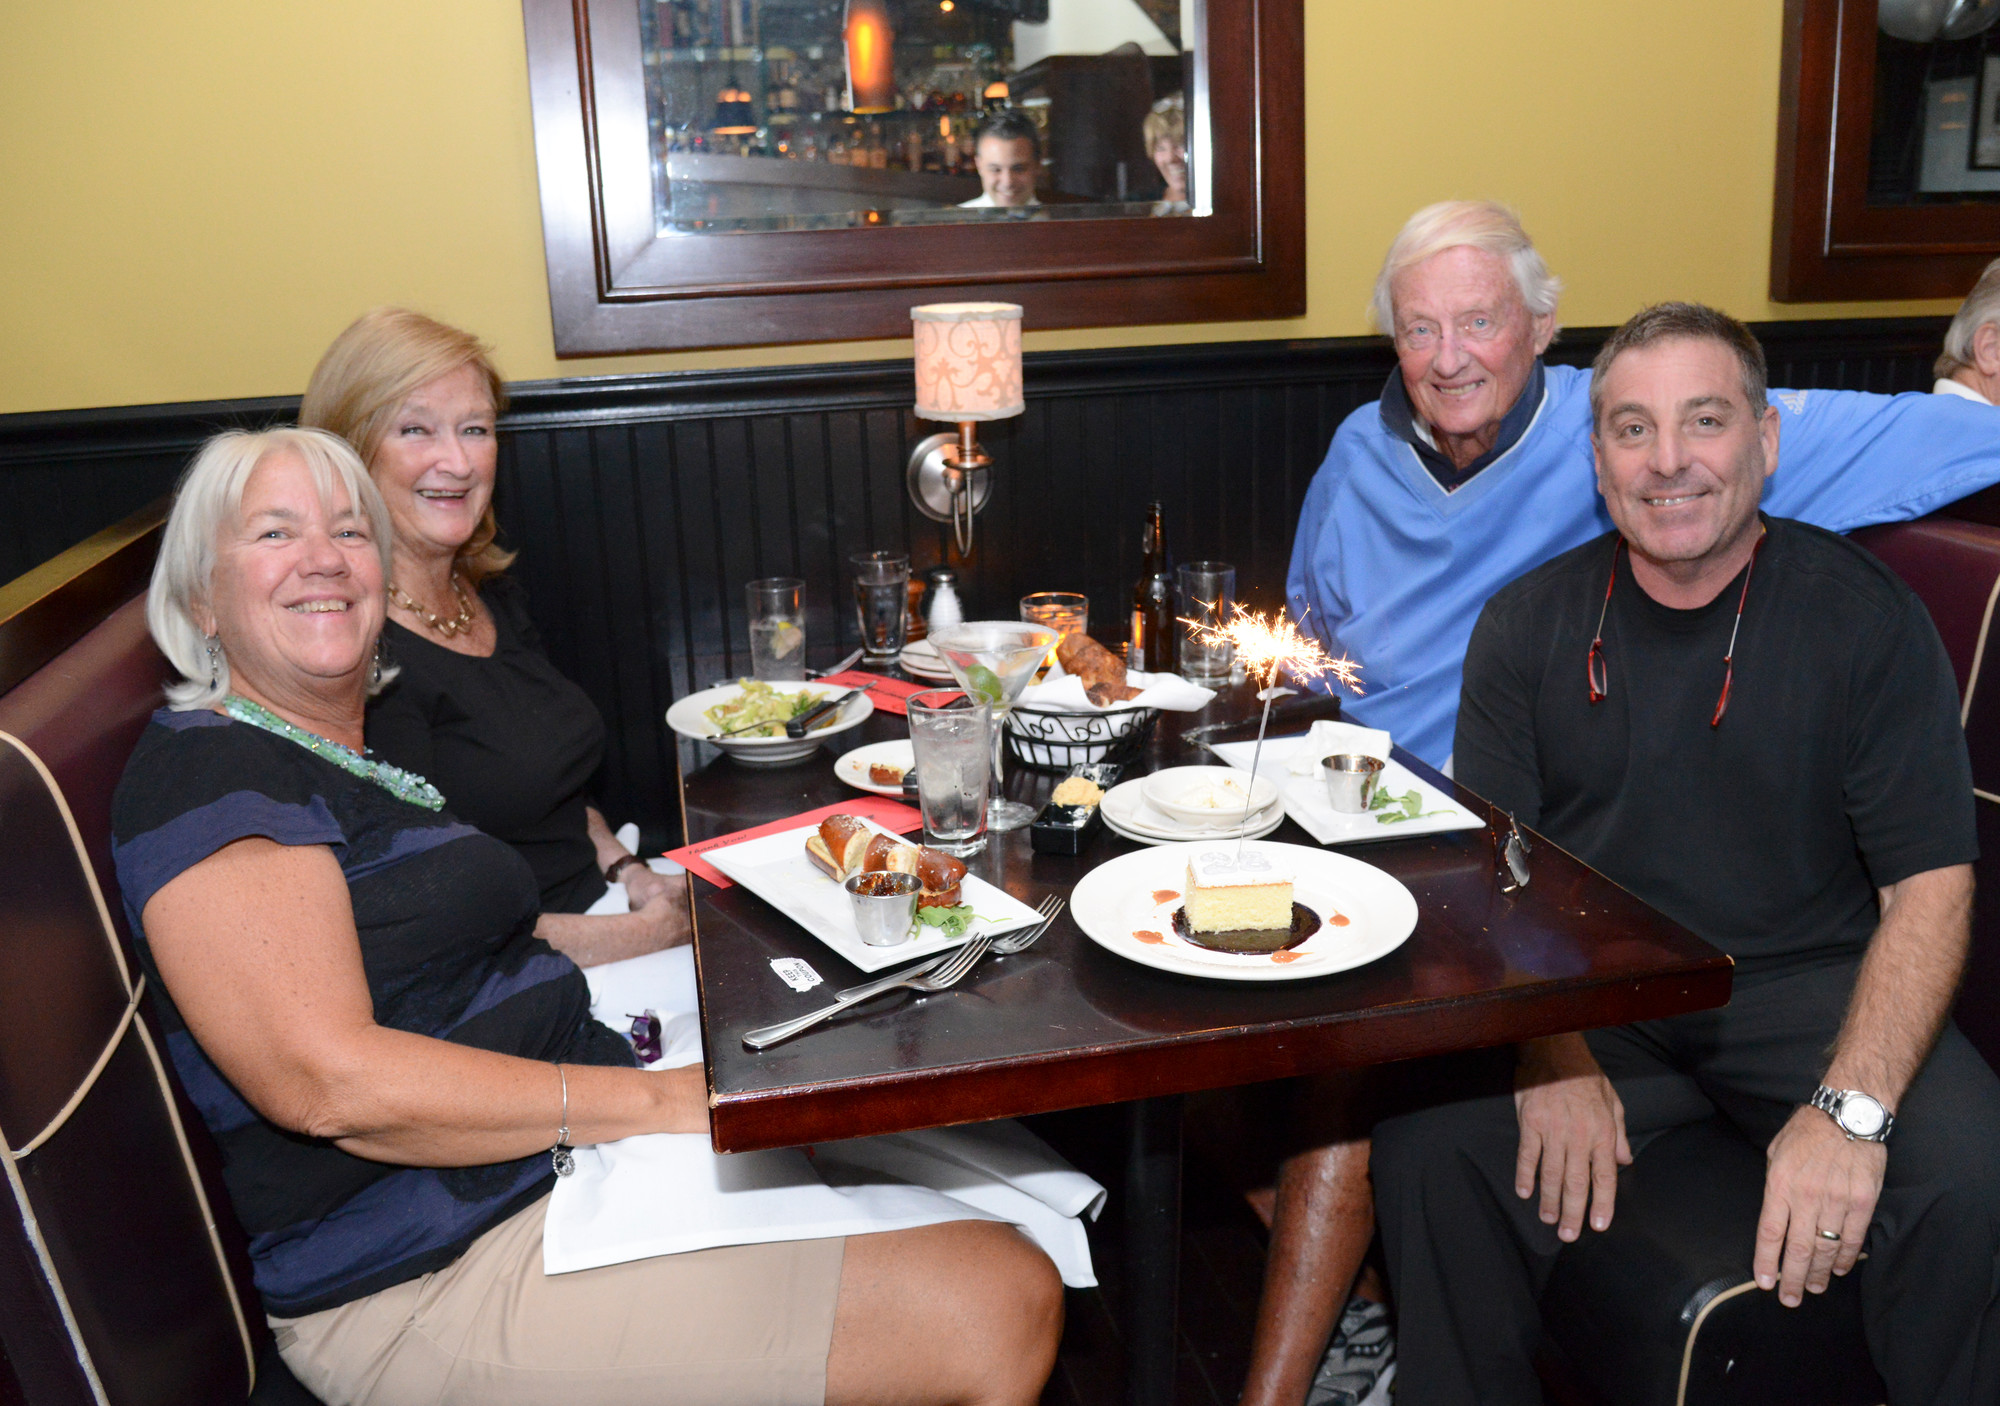 George Martin Restaurant celebrated its 25th anniversary with longtime original patrons MaryAnn Hanson, Bernadette and Dan Morrissey, along with owner George Korten and a sparkle cake.